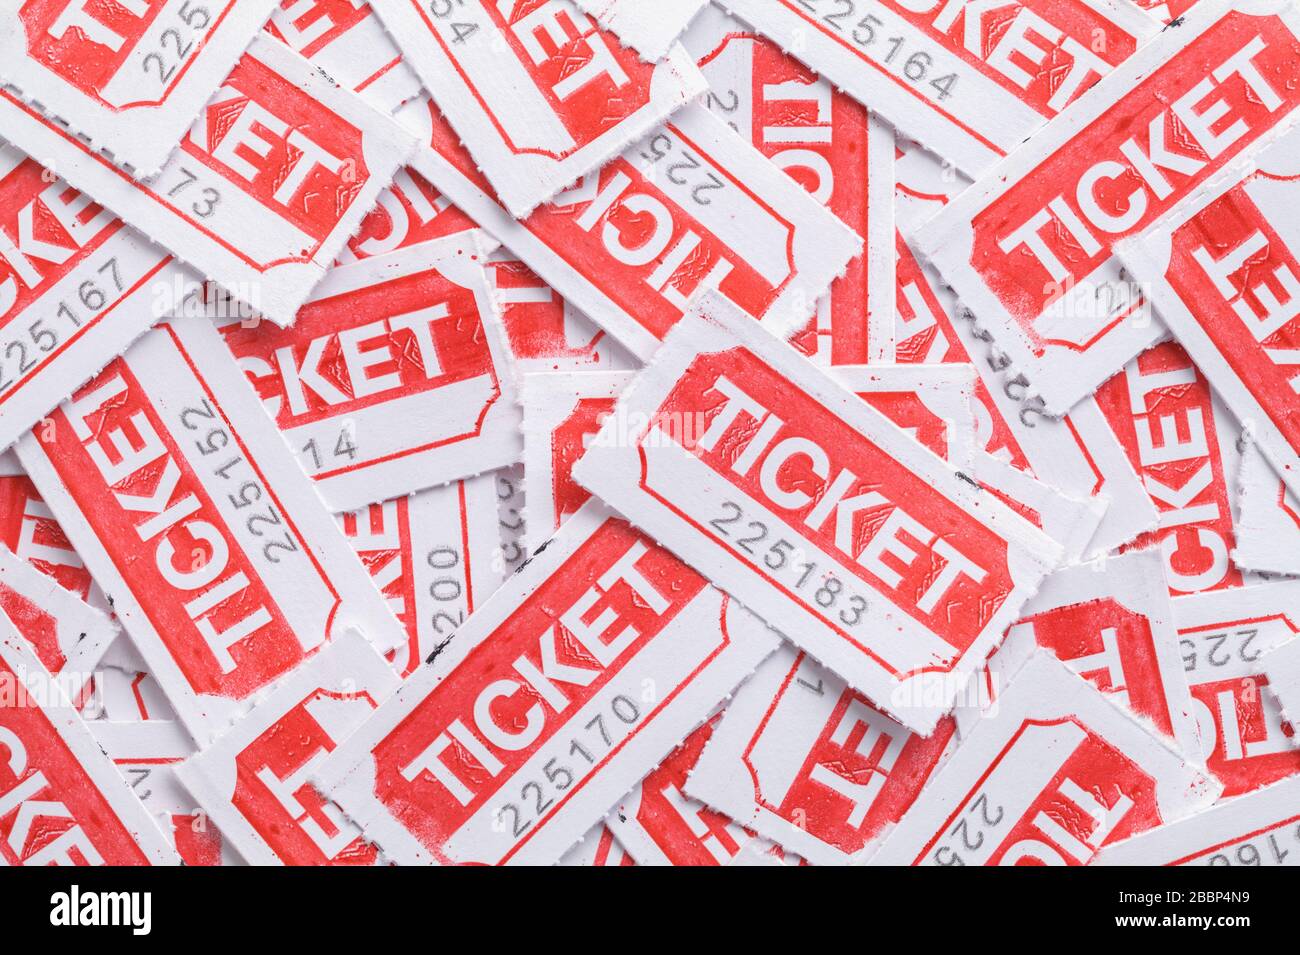 Red Tickets Laying in Large Pile Background. Stock Photo